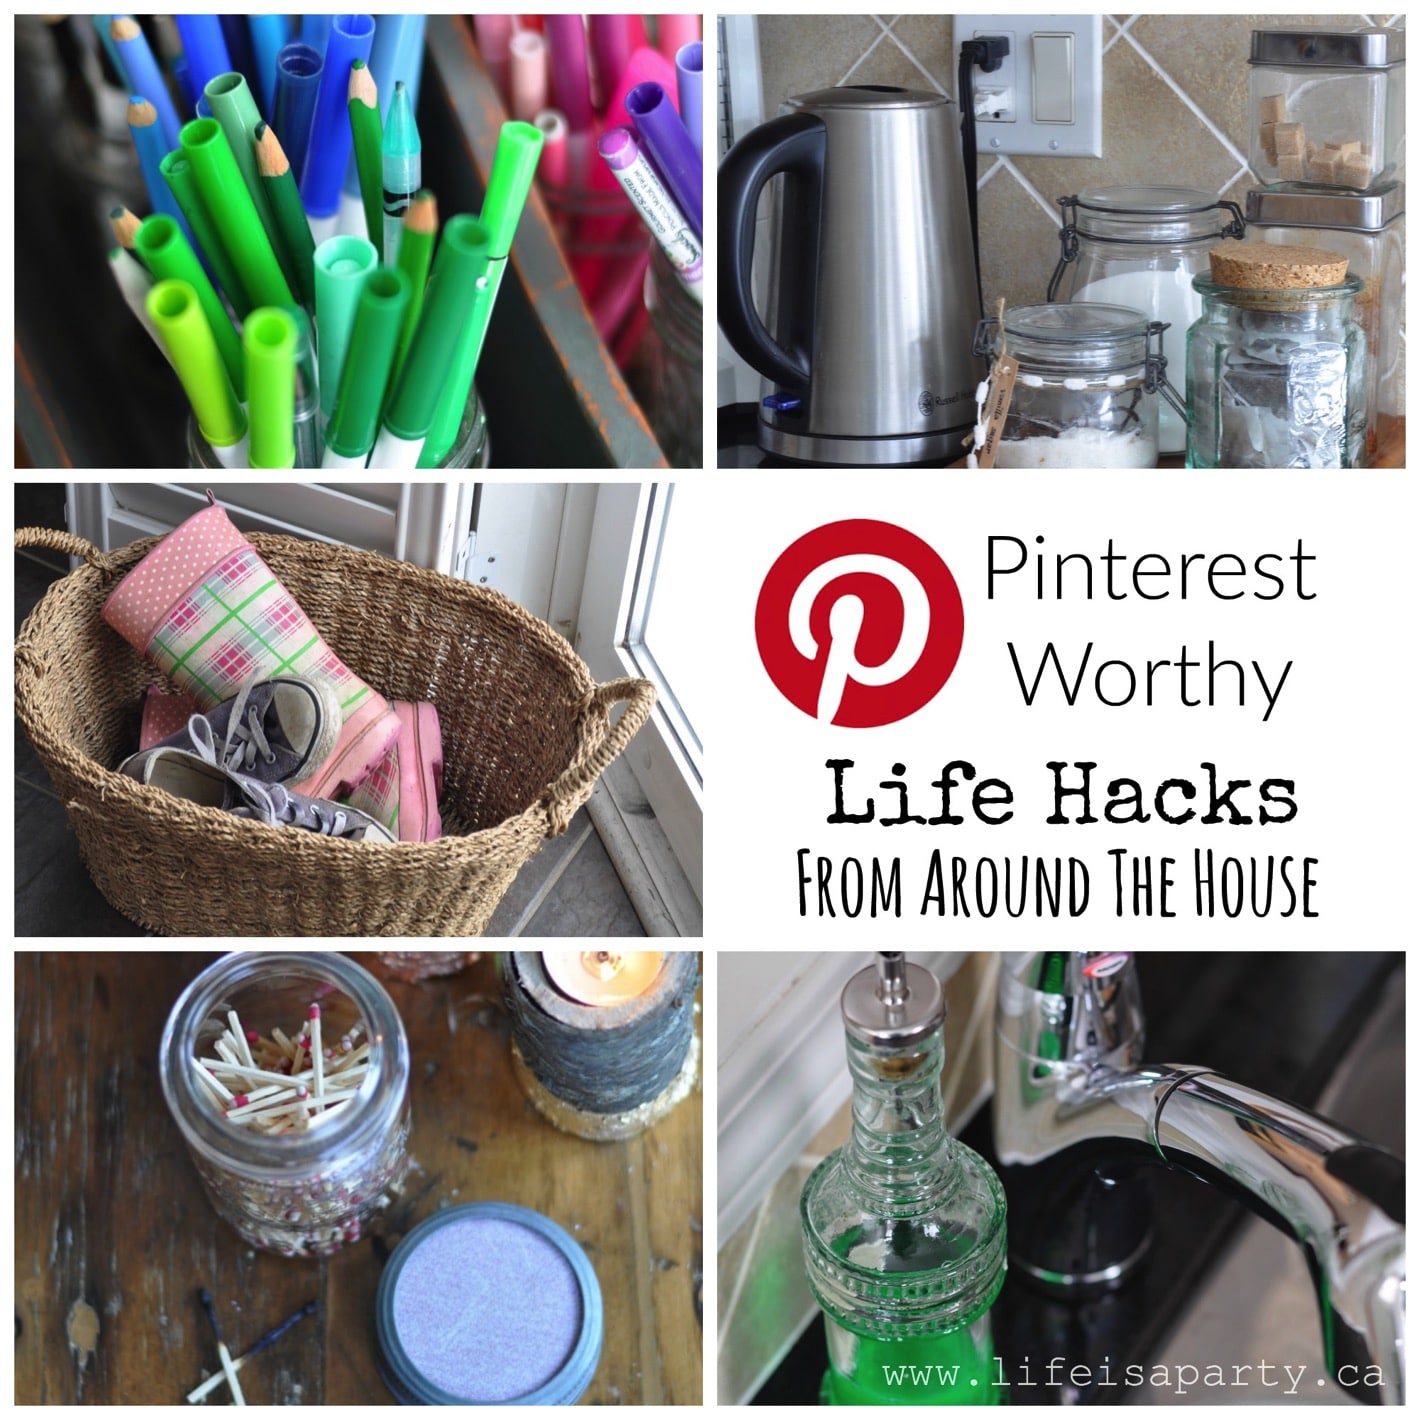 Pinterest Worthy Life Hack Ideas From Around The House: A few easy ideas to make life a little simpler, easier, and more organized.